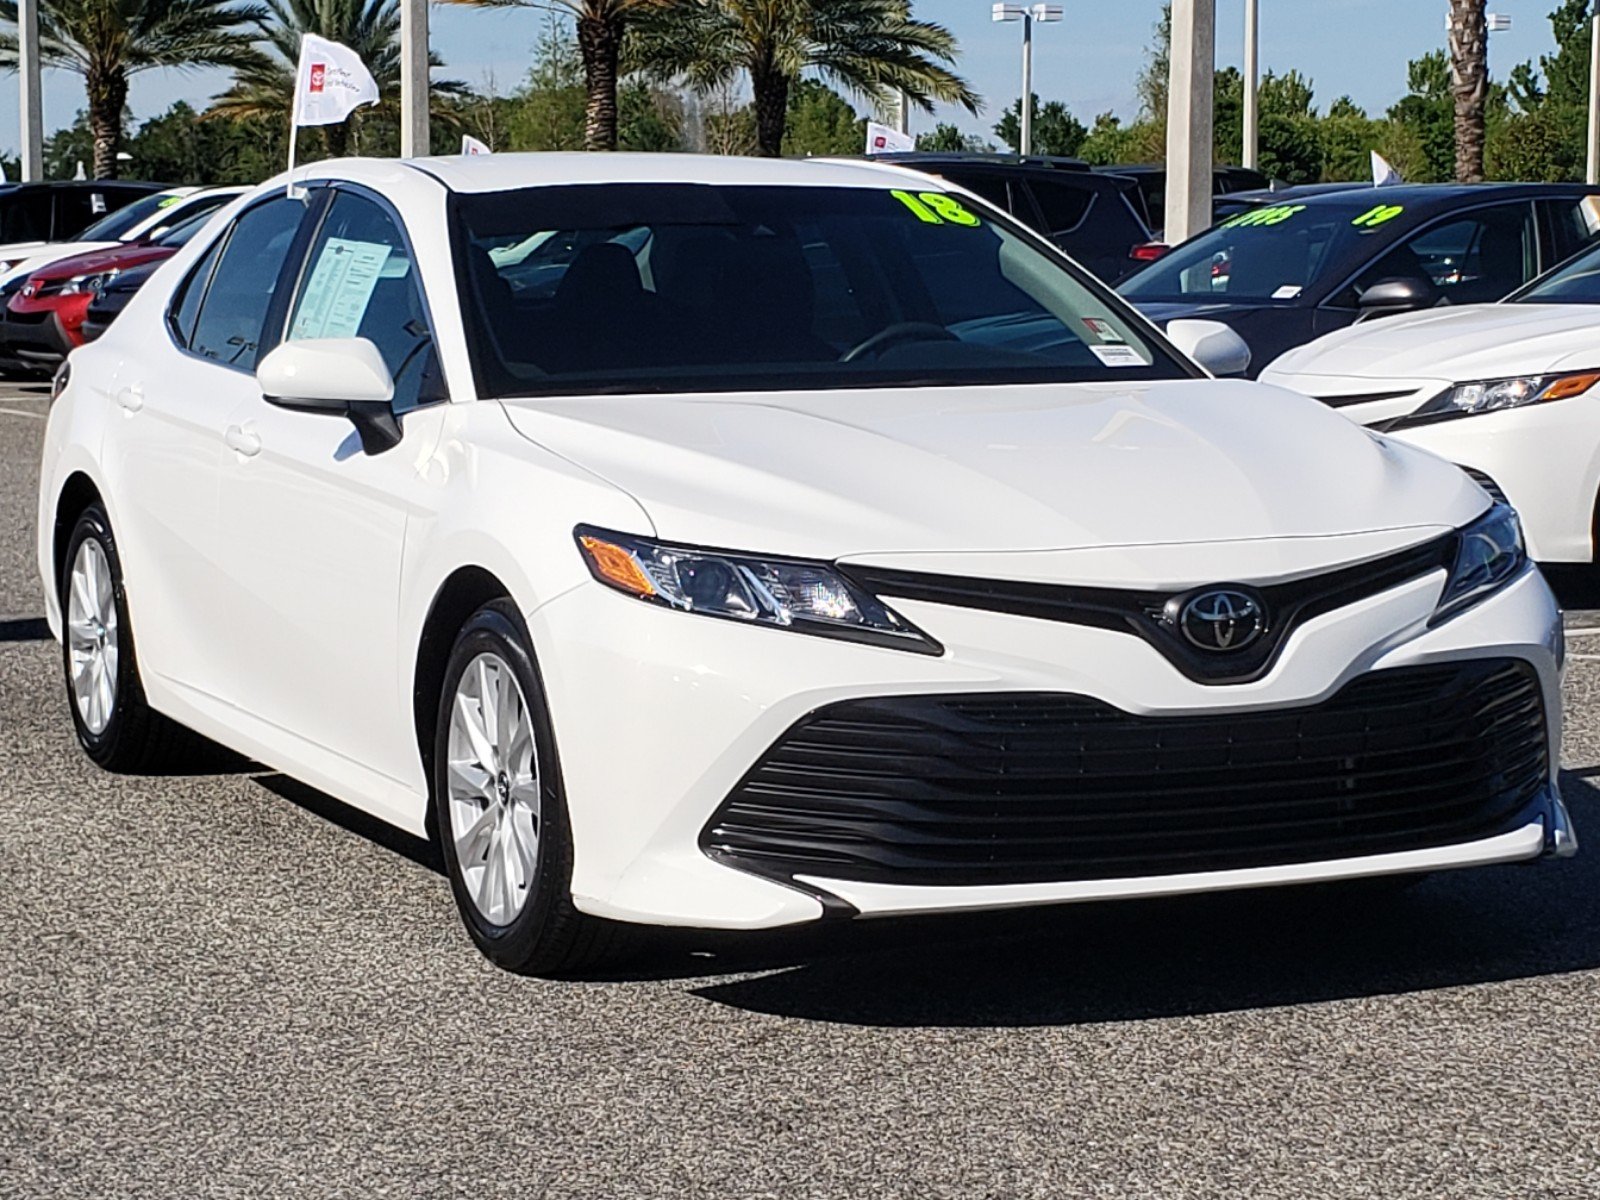 Certified Pre-Owned 2018 Toyota Camry LE 4dr Car in Orlando #0250350A ...